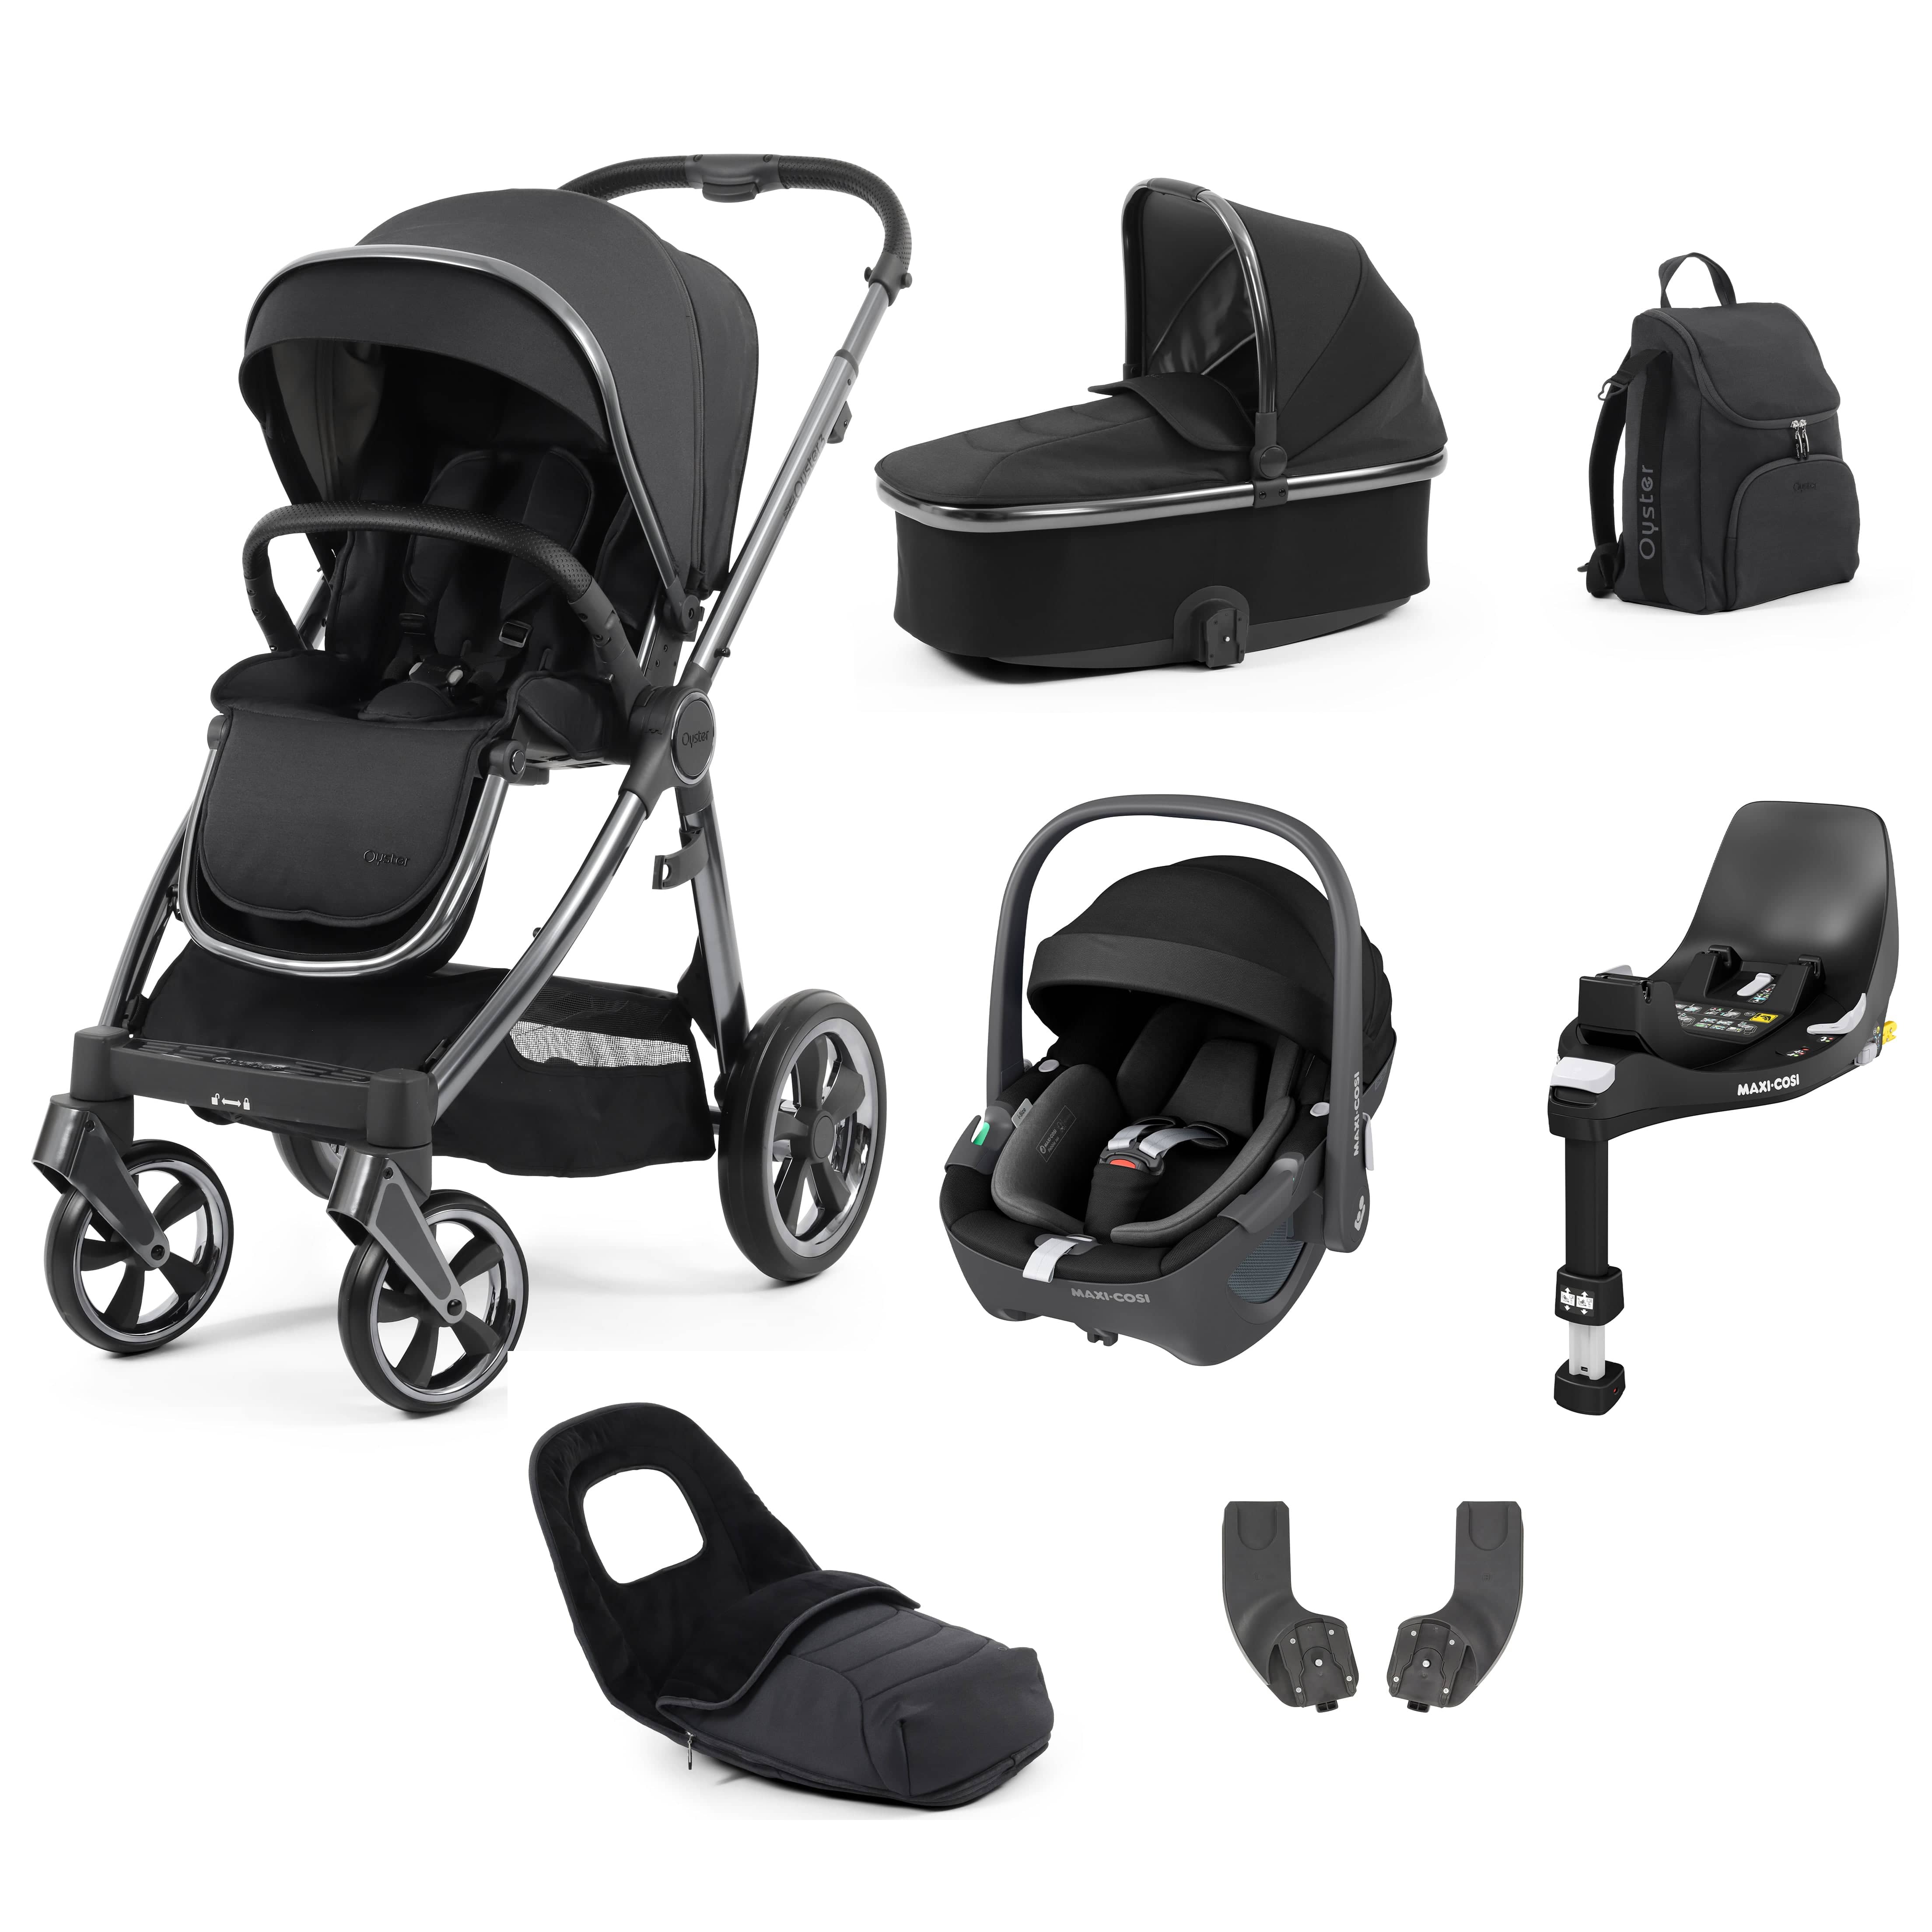 Babystyle Oyster 3 Luxury 7 Piece with Car Seat Bundle in Carbonite Travel Systems 14805-CRB 5060711567242